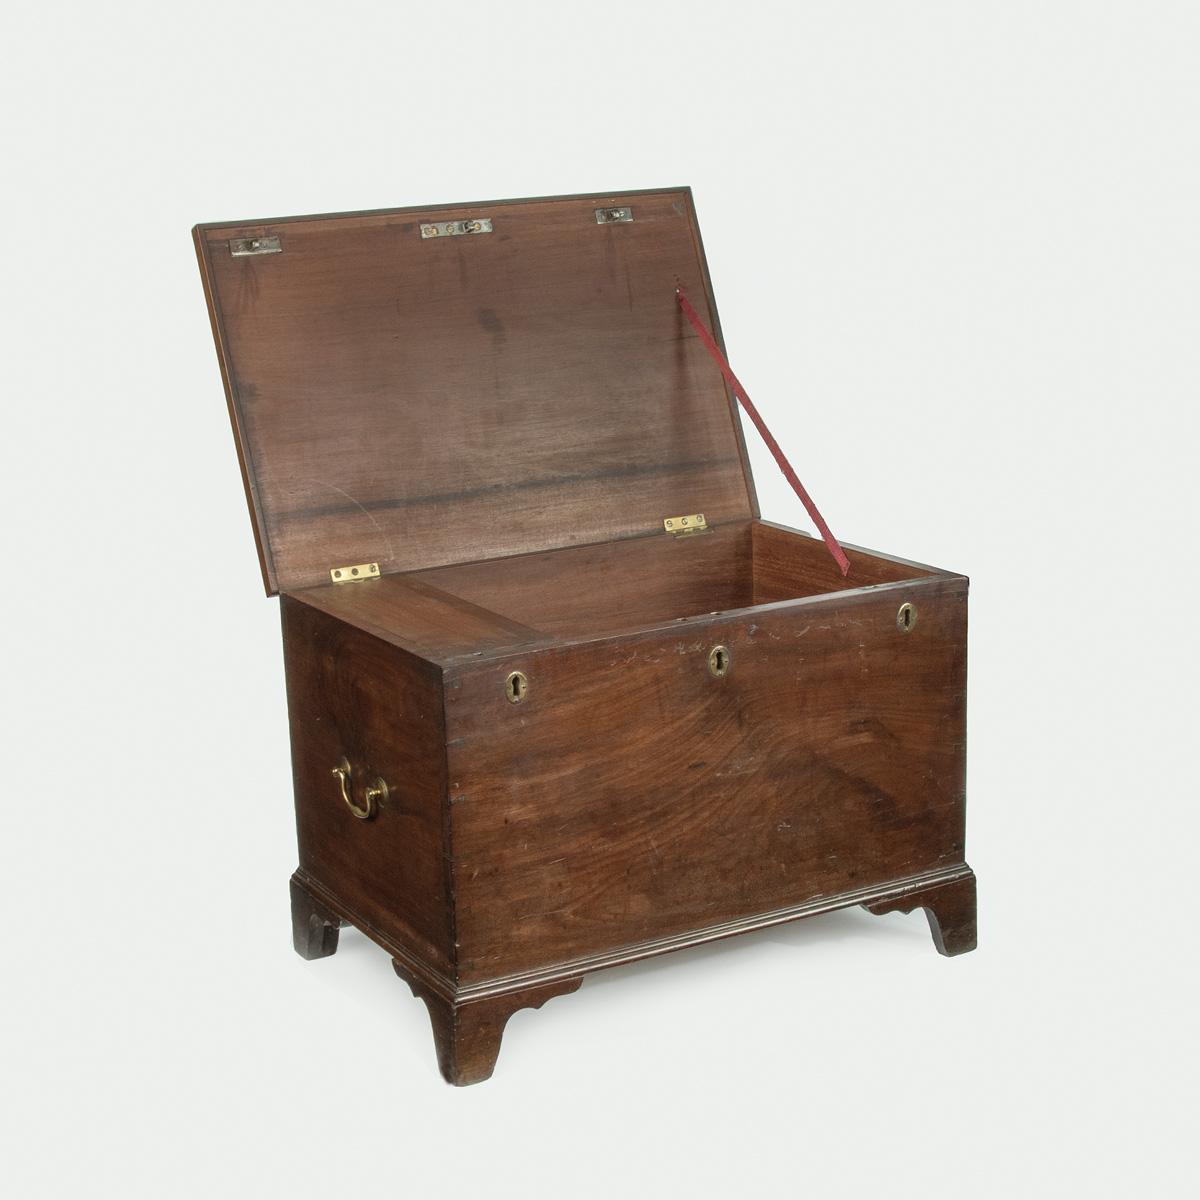 A mahogany strong box made for the Ovenden Female Society, Instituted May 1809